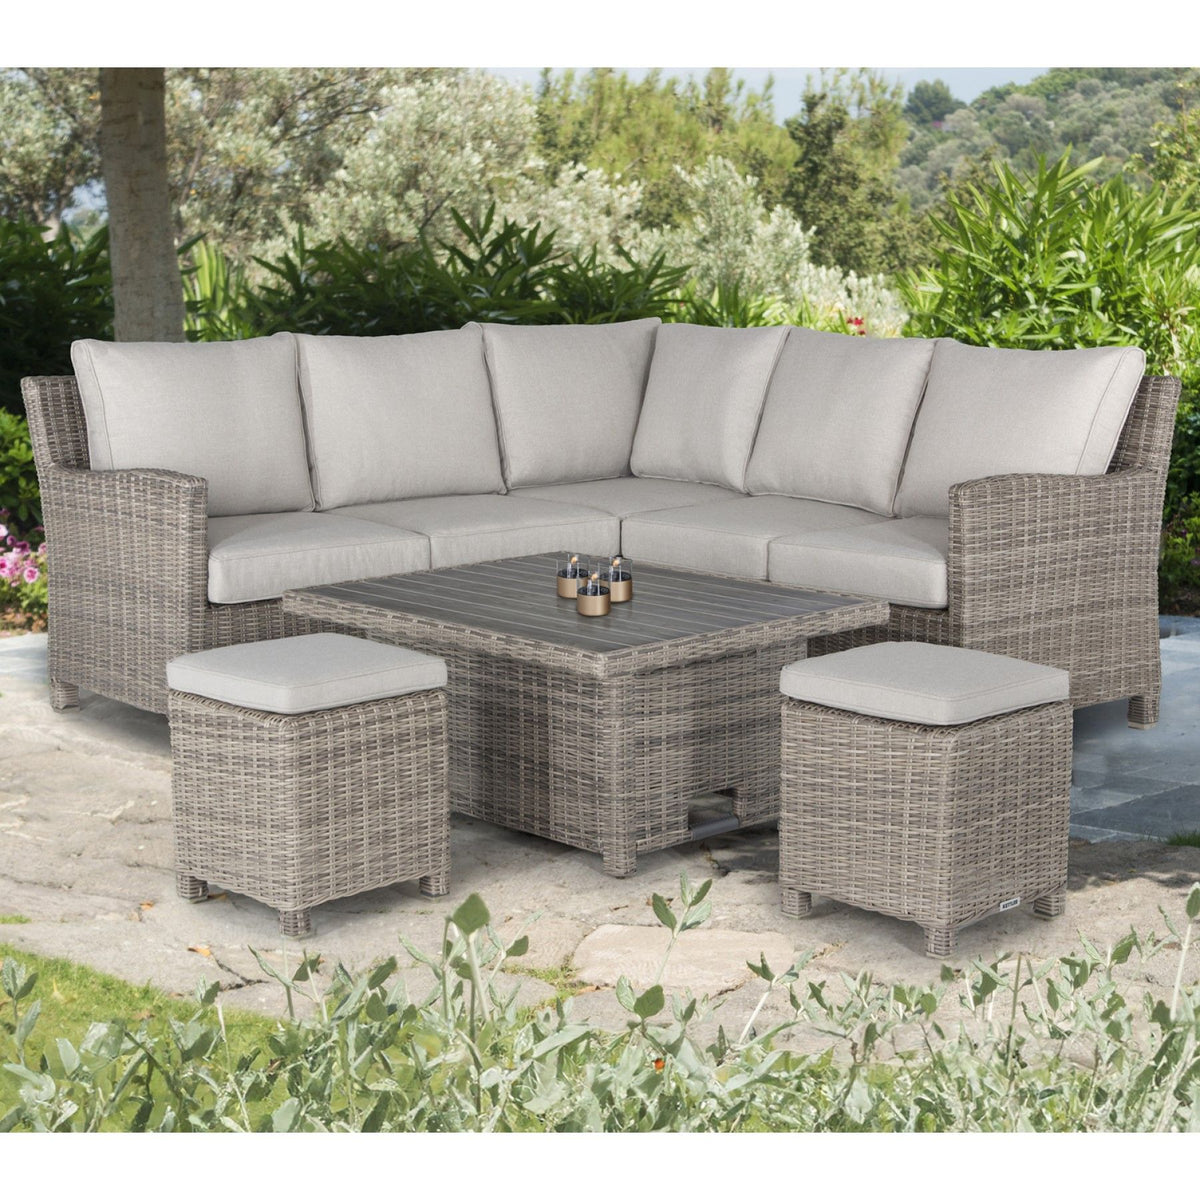 Kettler Palma Signature Mini Corner Oyster Wicker Outdoor Sofa Set with High Low Slat Top Table